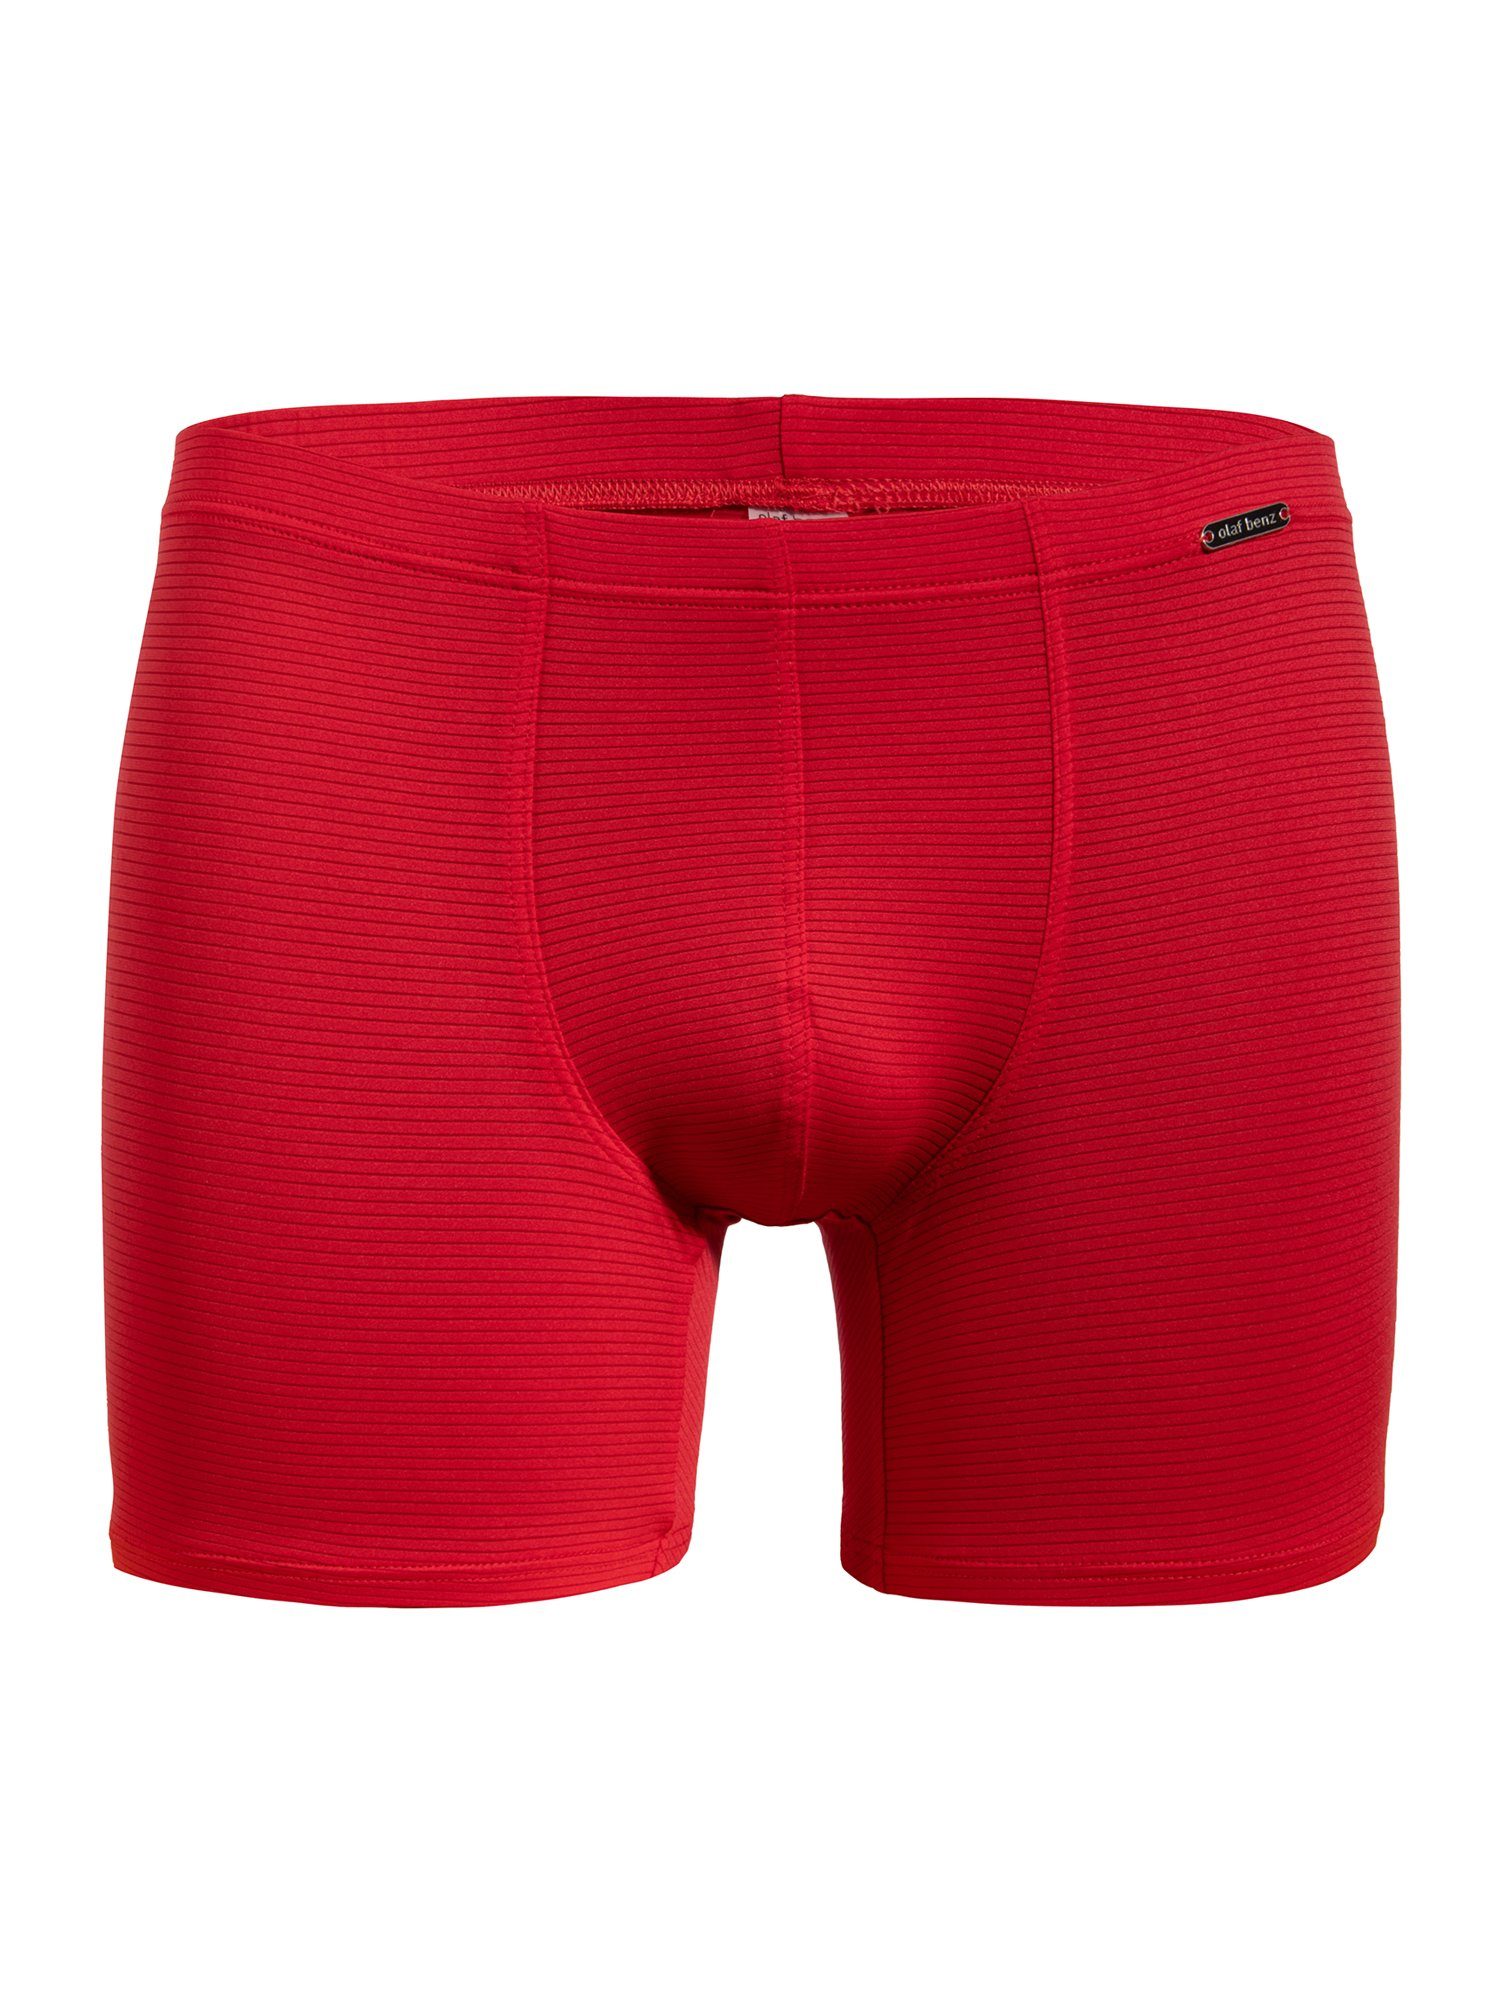 RED1201 Retro Boxerpants (1-St) Benz Boxer Olaf